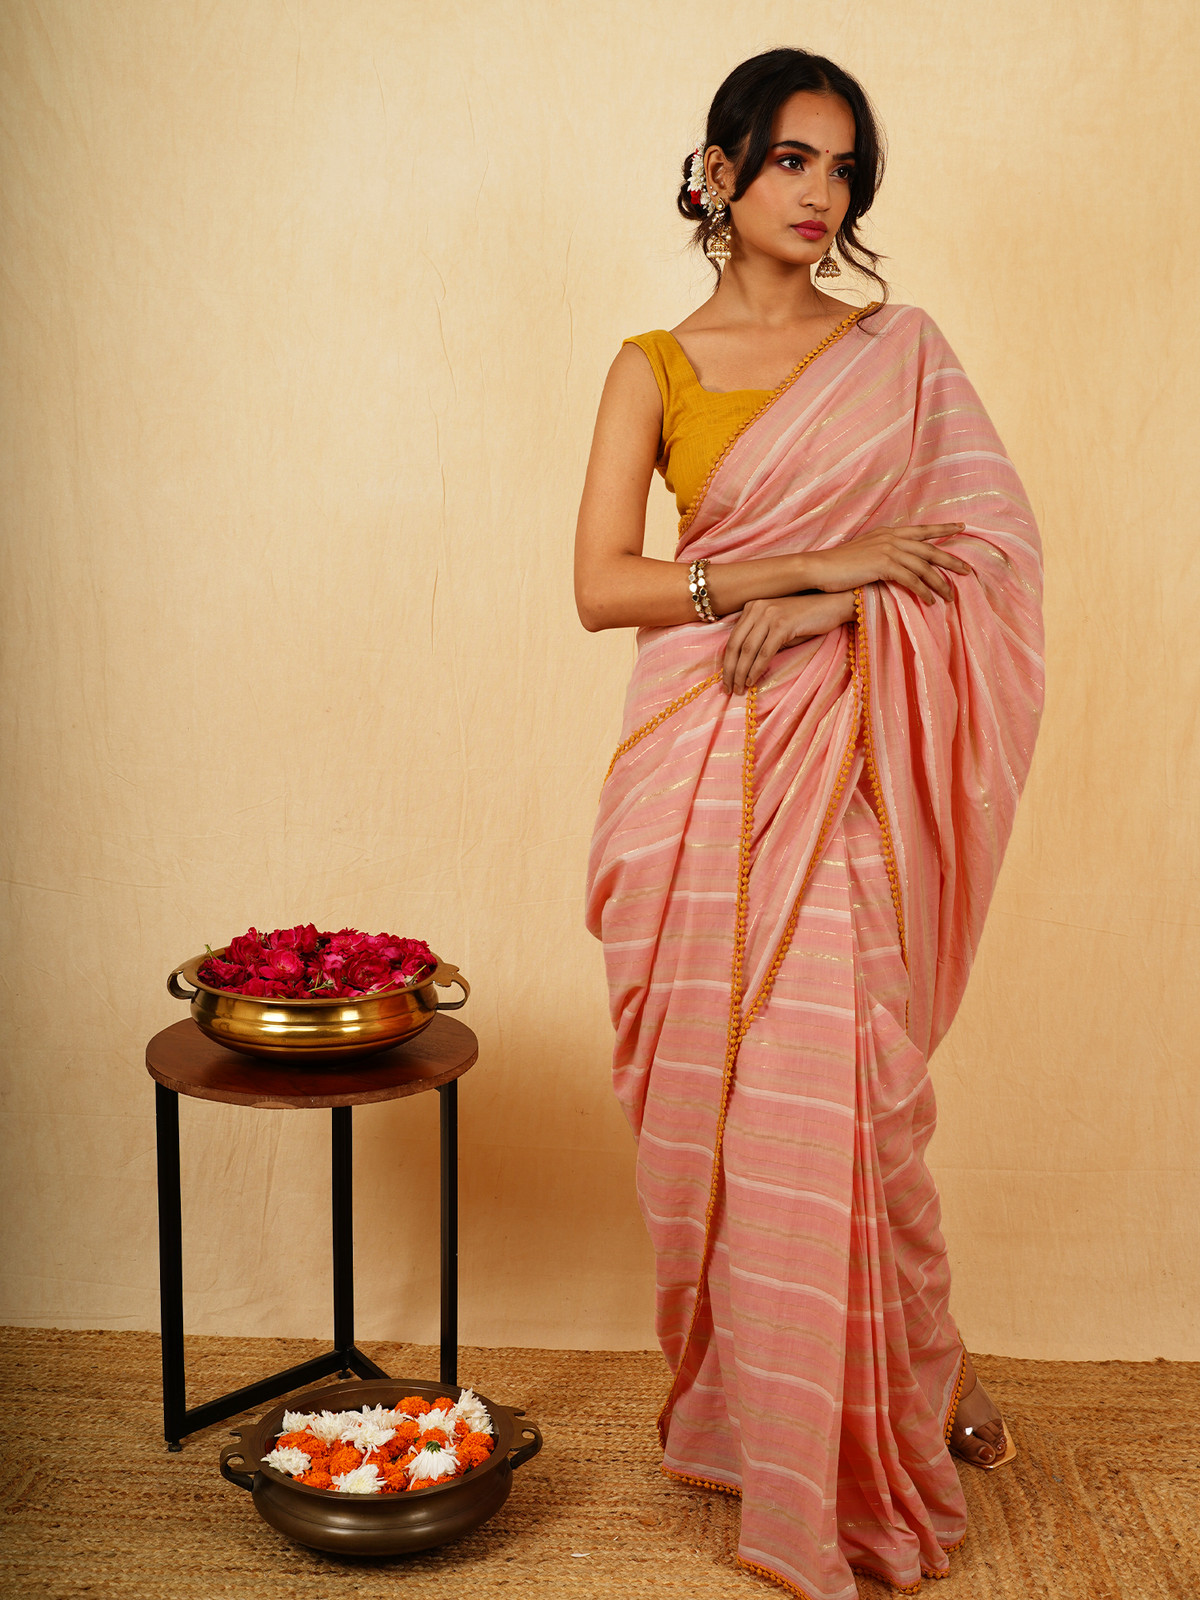 How To Wear Sarees For A Glamourous Look